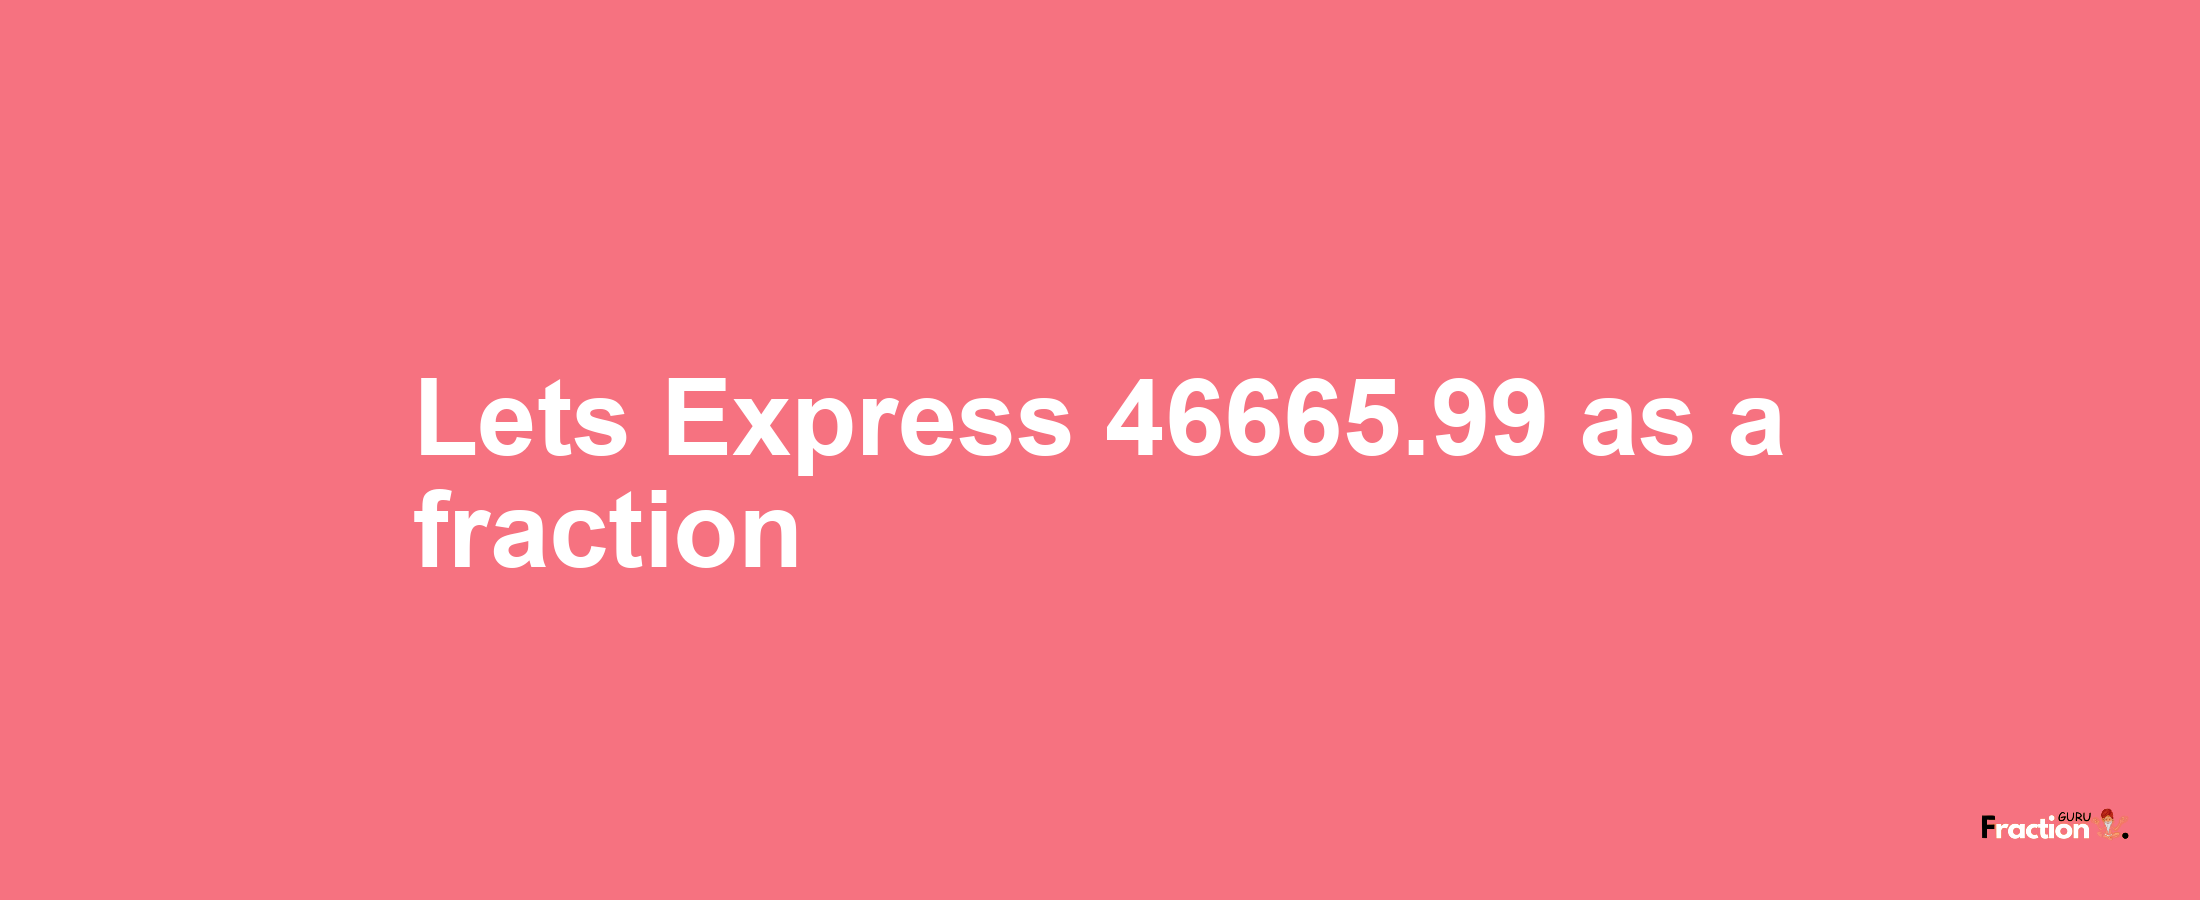 Lets Express 46665.99 as afraction